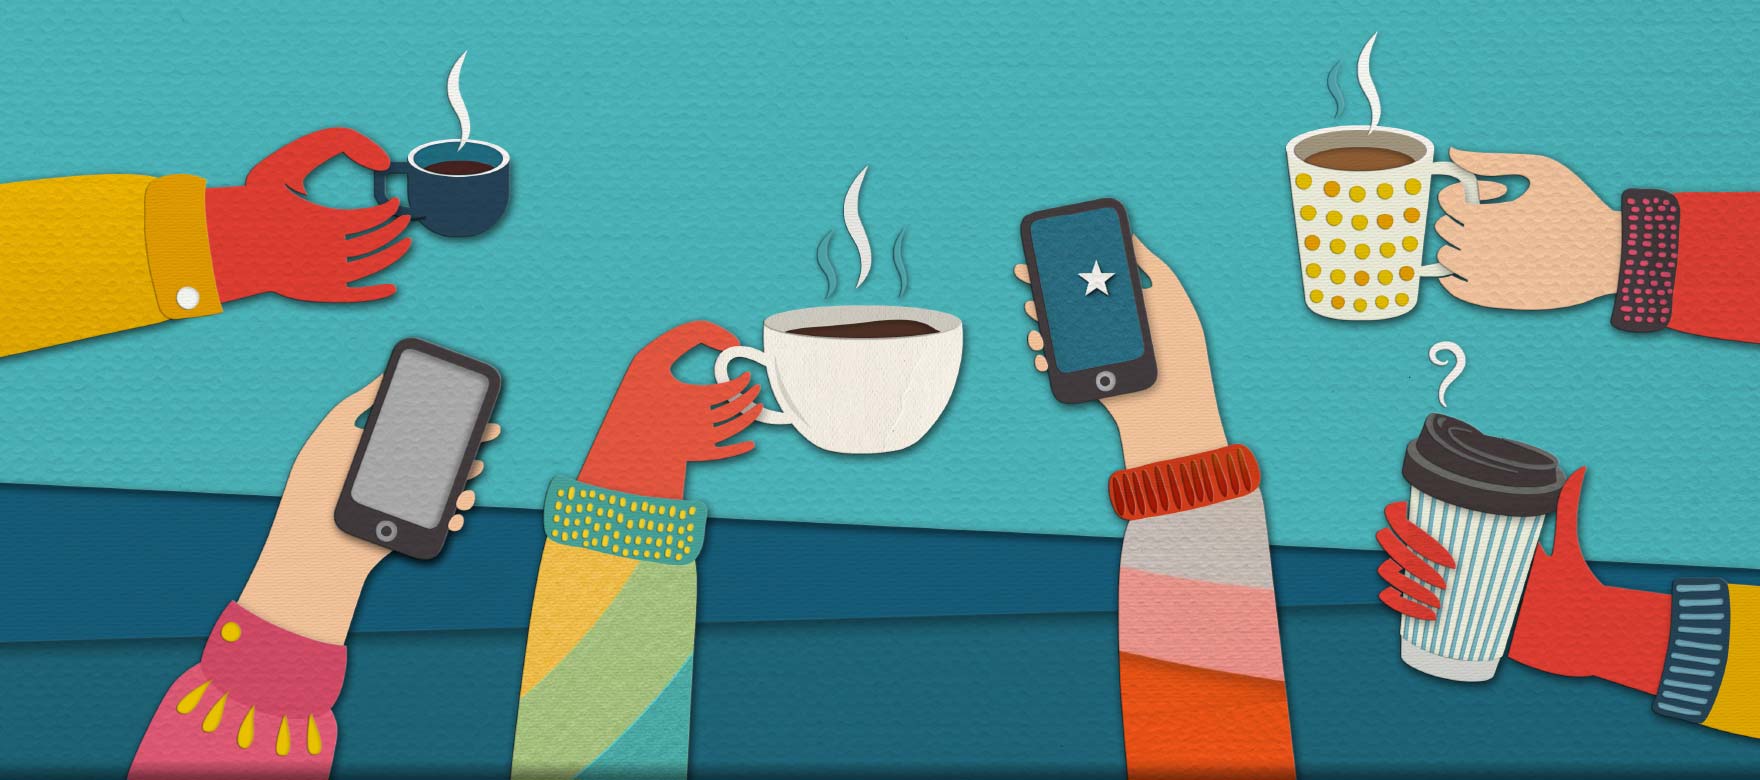 Coffee cups and mobile phones